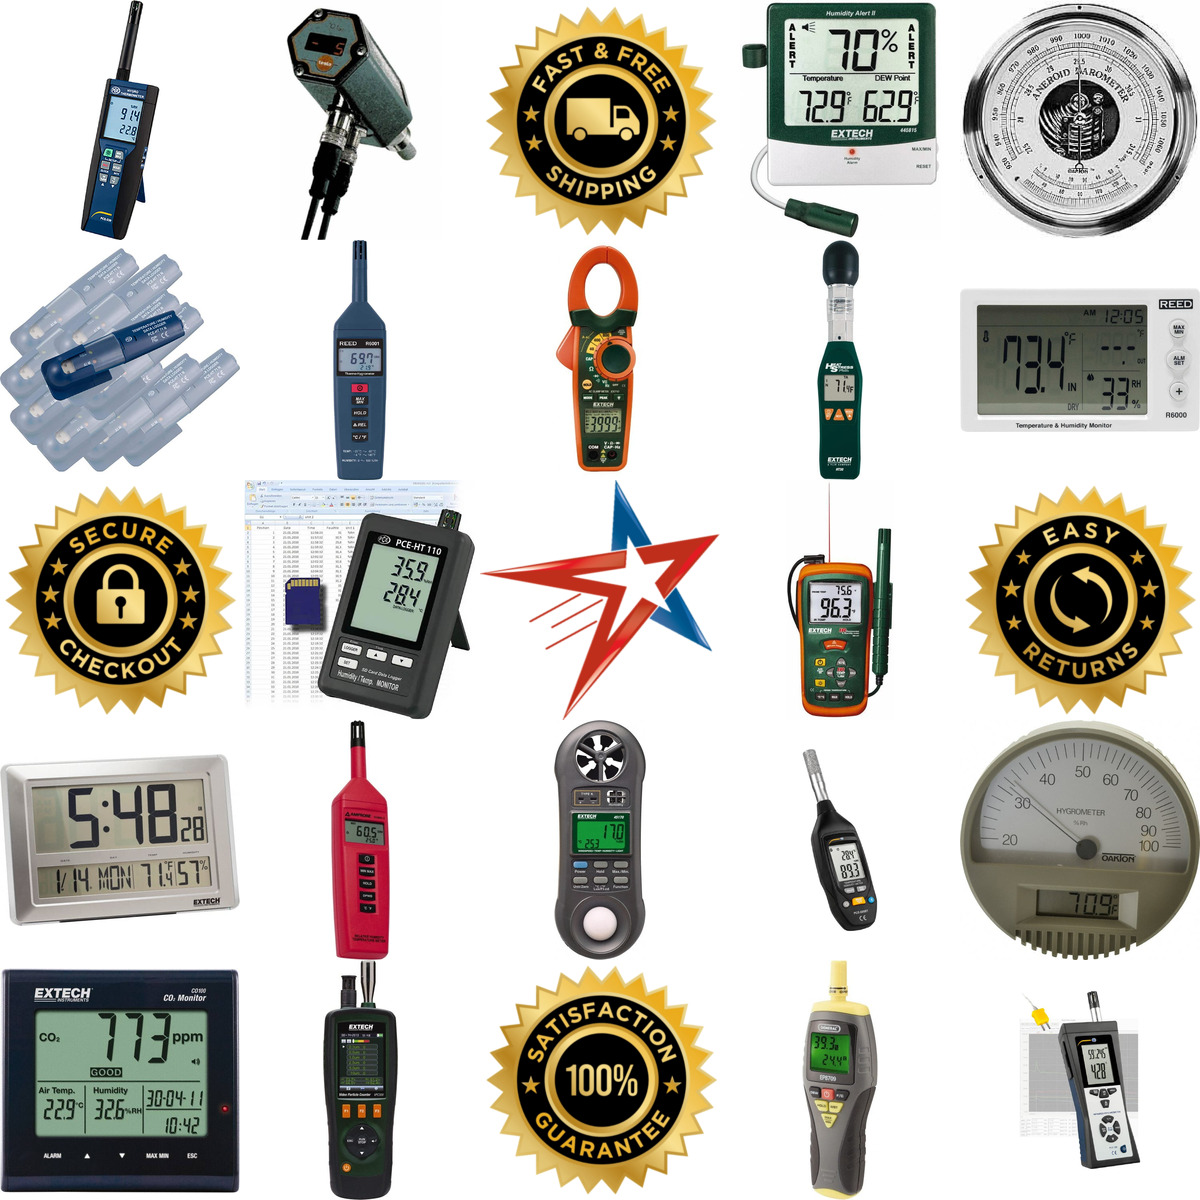 A selection of Thermometer Hygrometers and Barometers products on GoVets